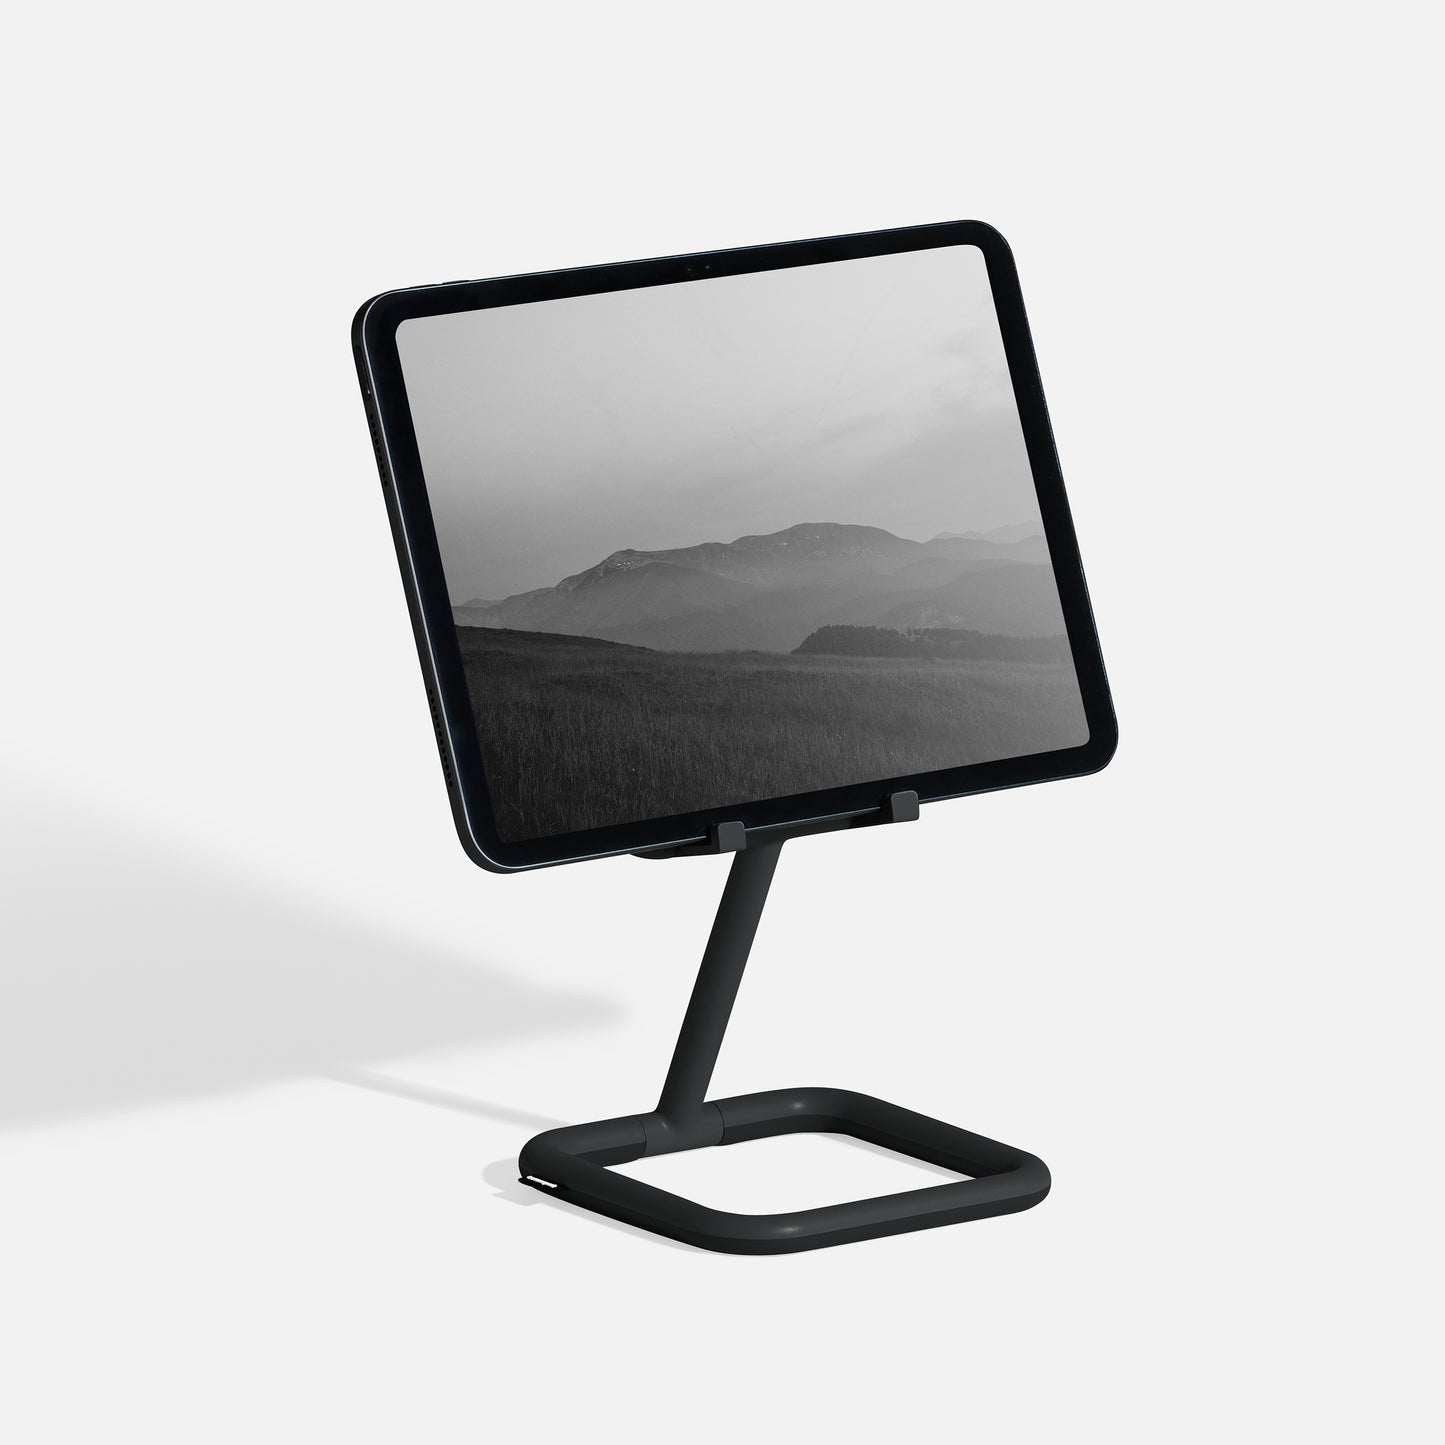 Adjustable tablet stand in black - Bouncepad Go